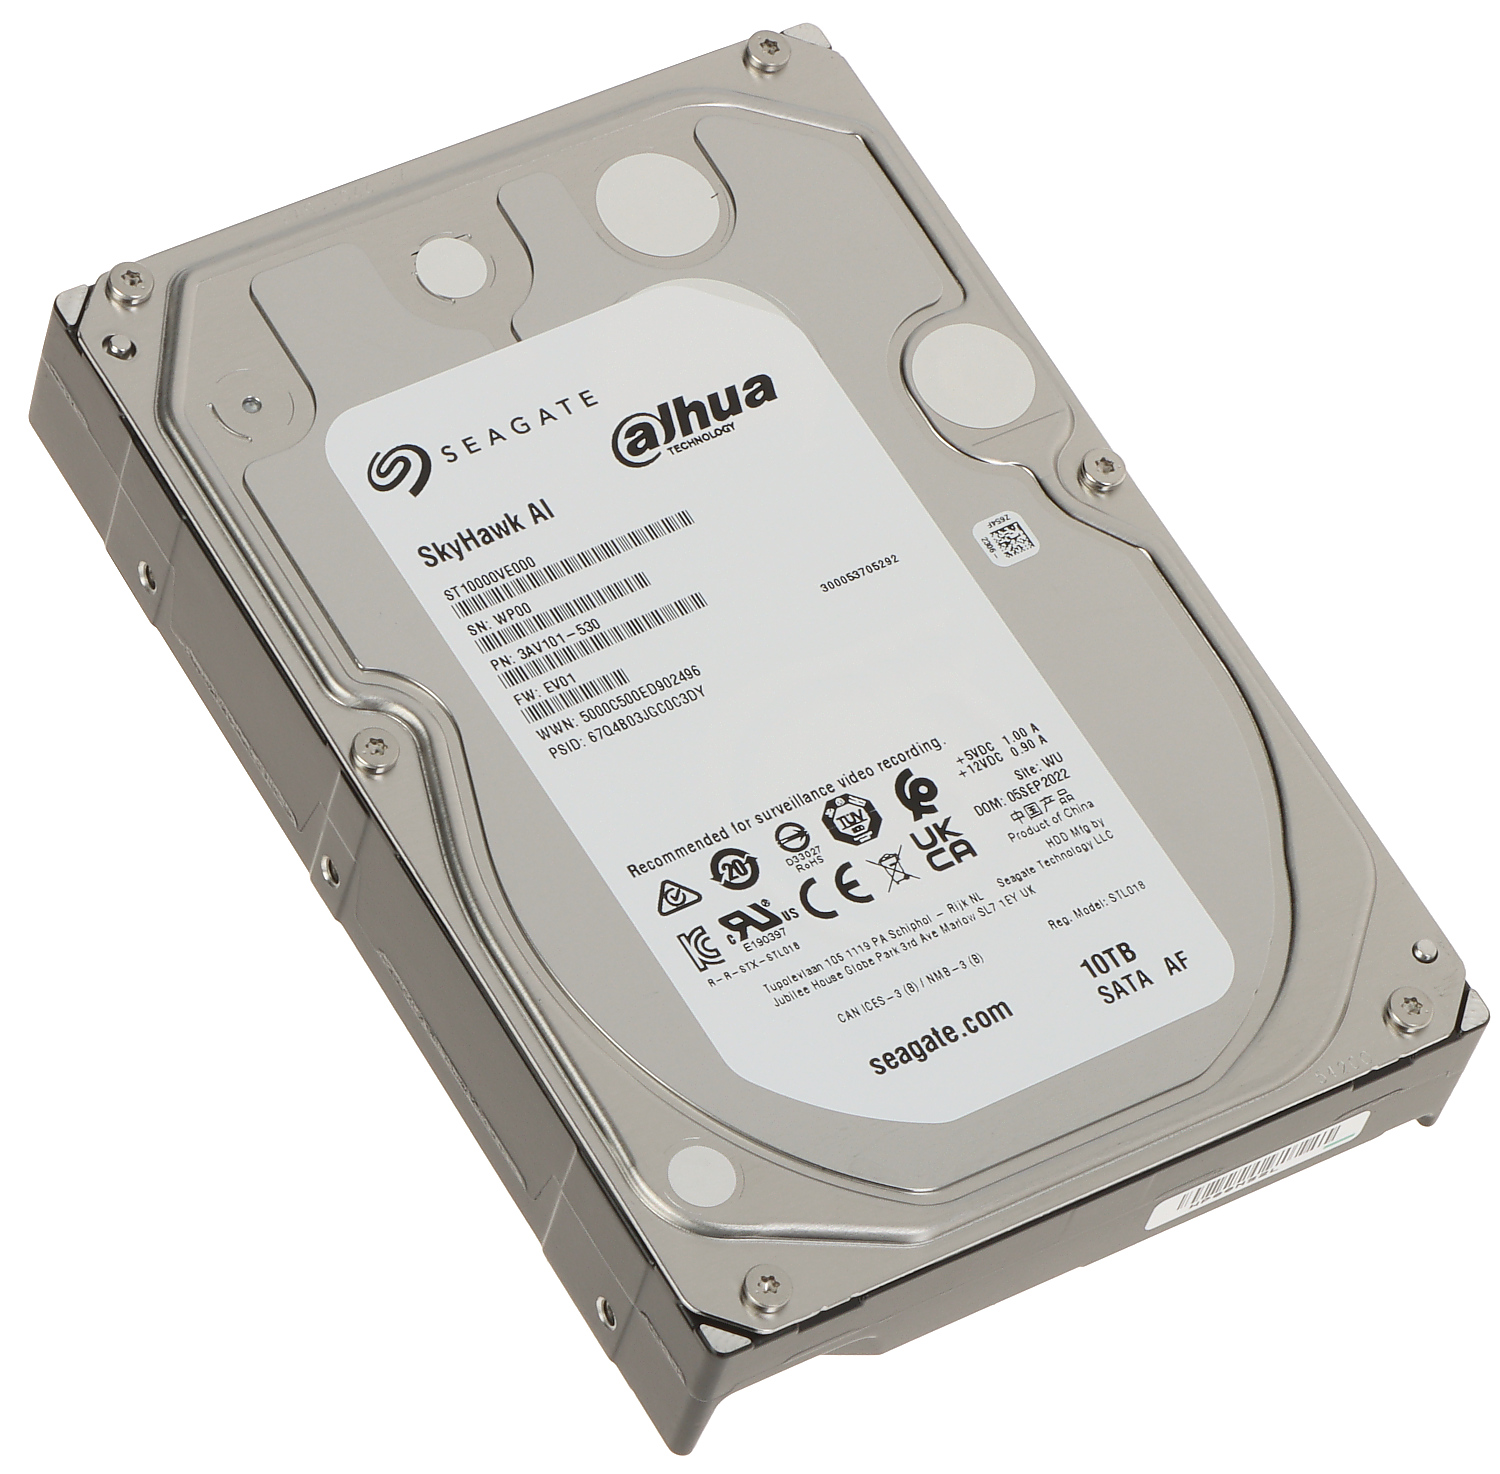 HDD FOR DVR HDD-ST10000VE000 10TB 24/7 SkyHawk AI SEAG... - HDDs - Delta